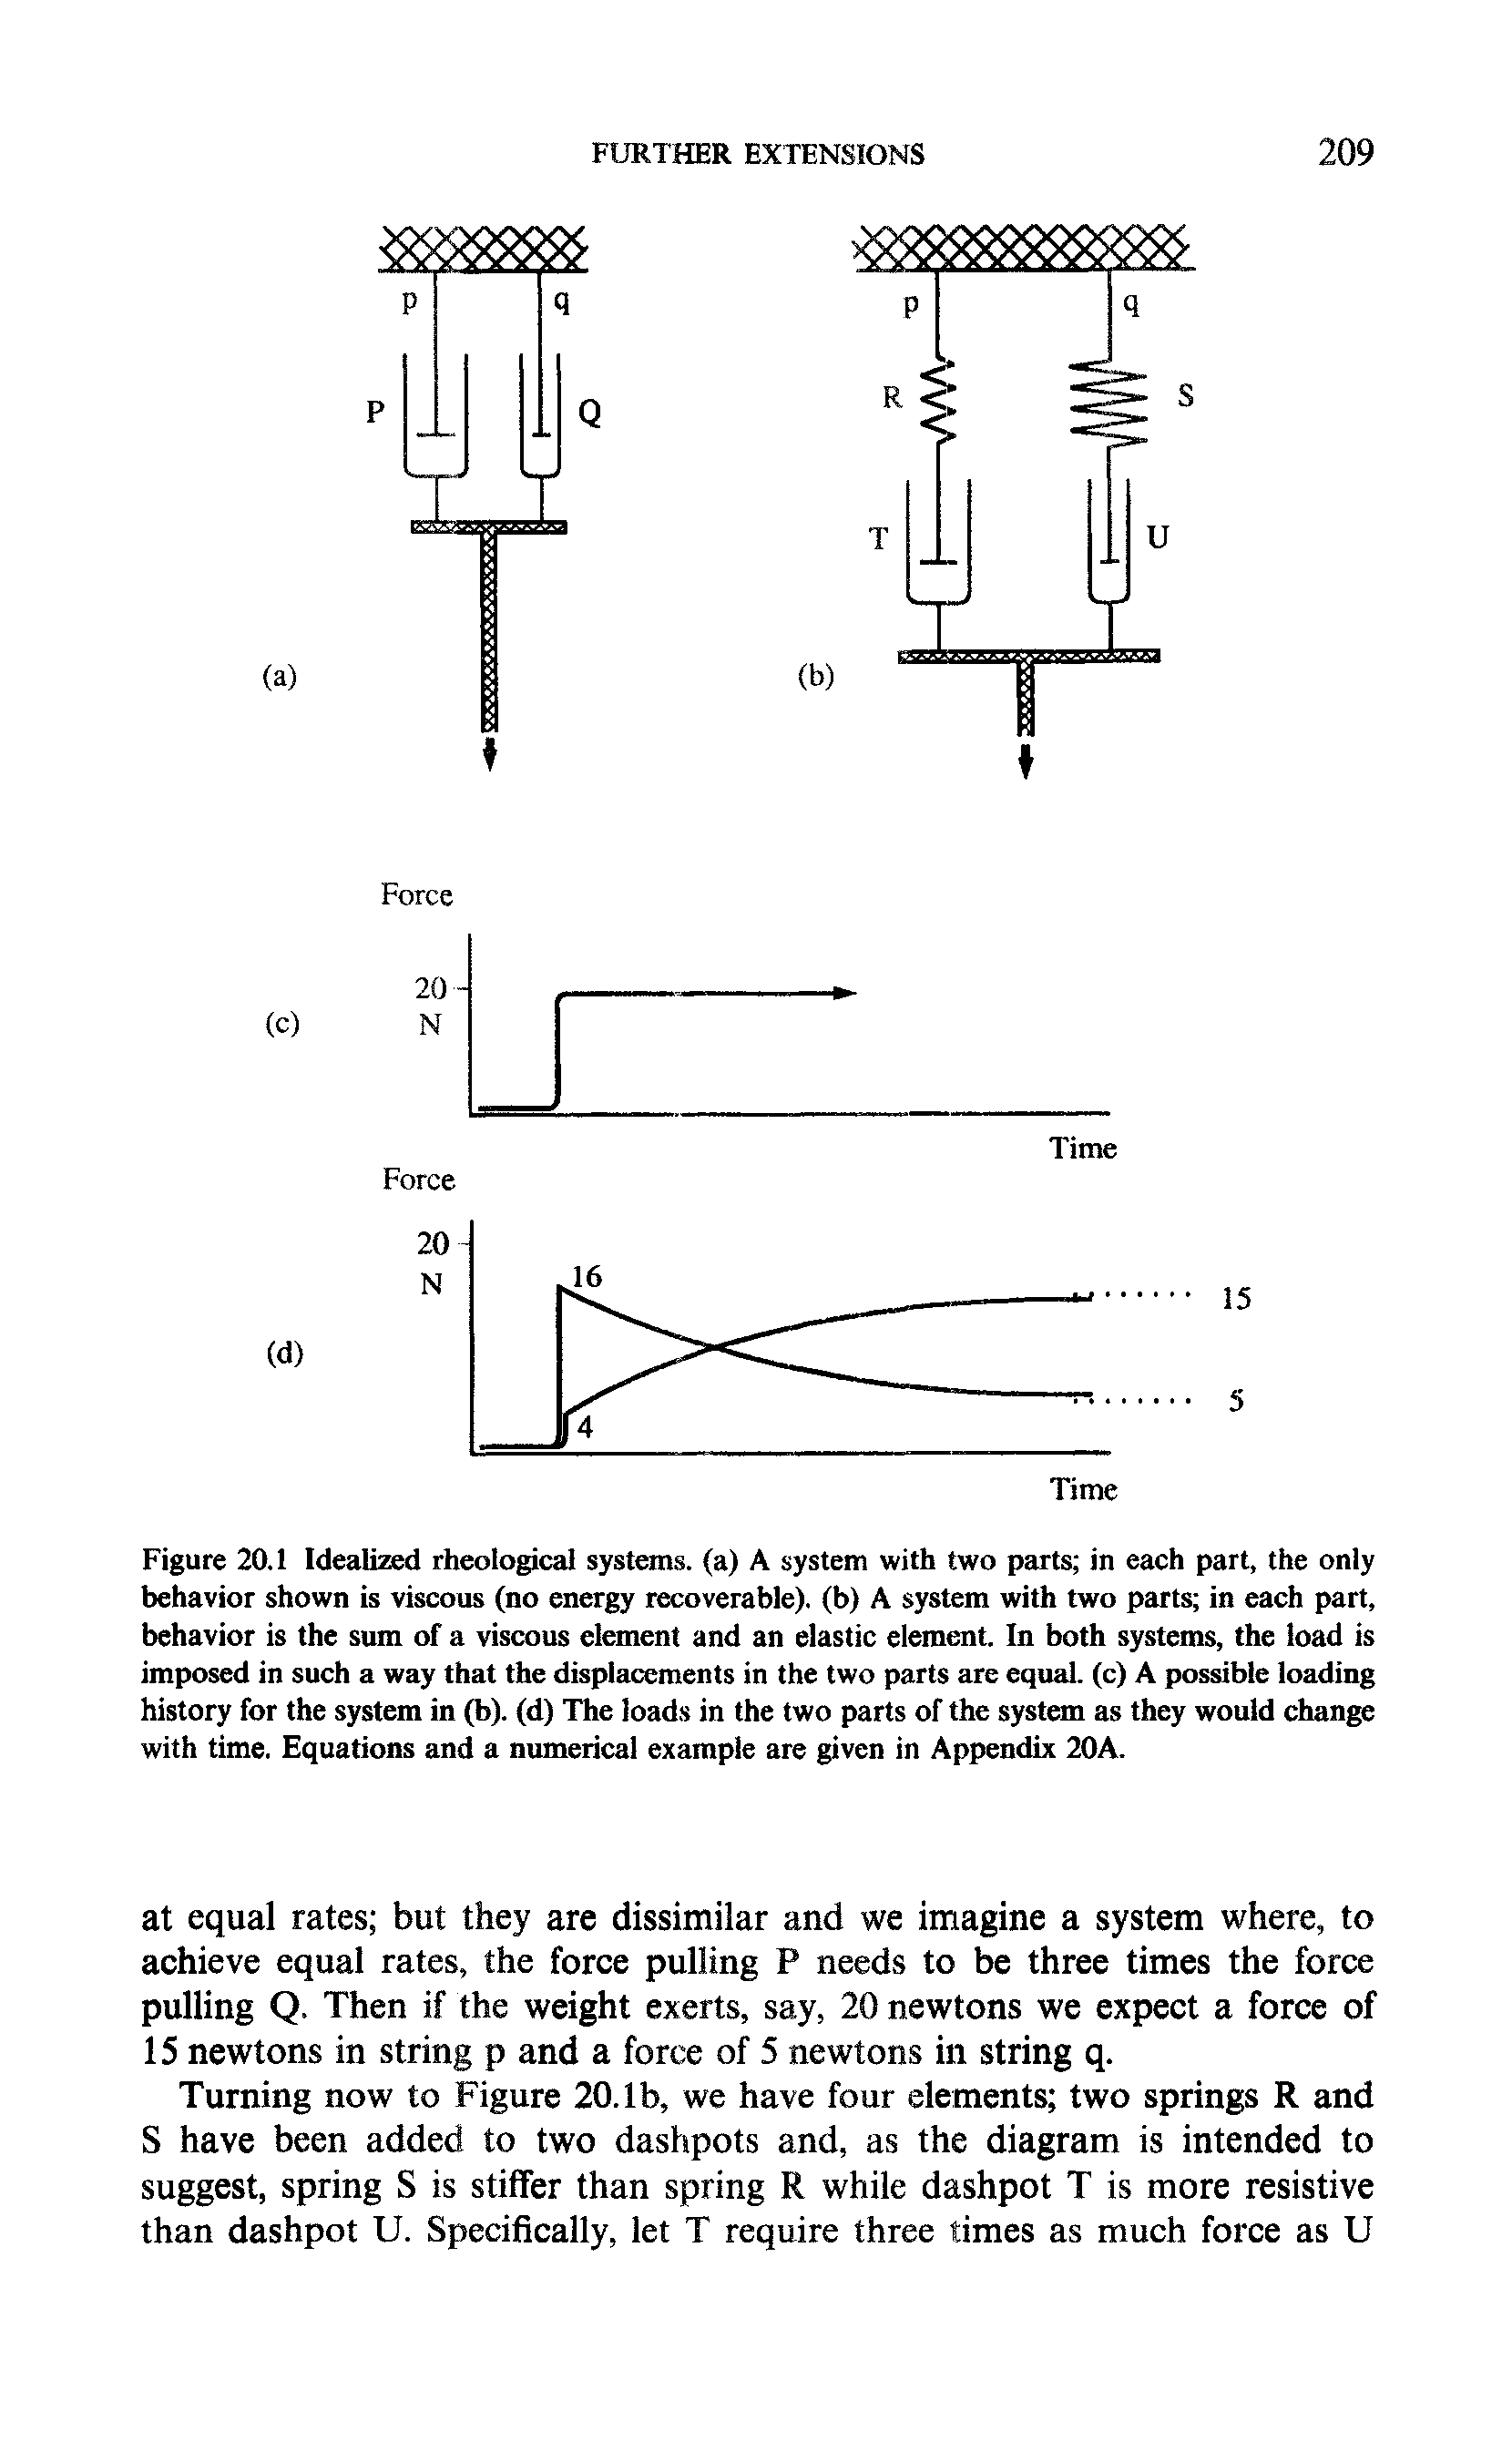 Figure 20.1 Idealized rheological systems, (a) A system with two parts in each part, the only behavior shown is viscous (no energy recoverable), (b) A system with two parts in each part, behavior is the sum of a viscous element and an elastic element. In both systems, the load is imposed in such a way that the displacements in the two parts are equal, (c) A possible loading history for the system in (b). (d) The loads in the two parts of the system as they would change with time. Equations and a numerical example are given in Appendix 20A.